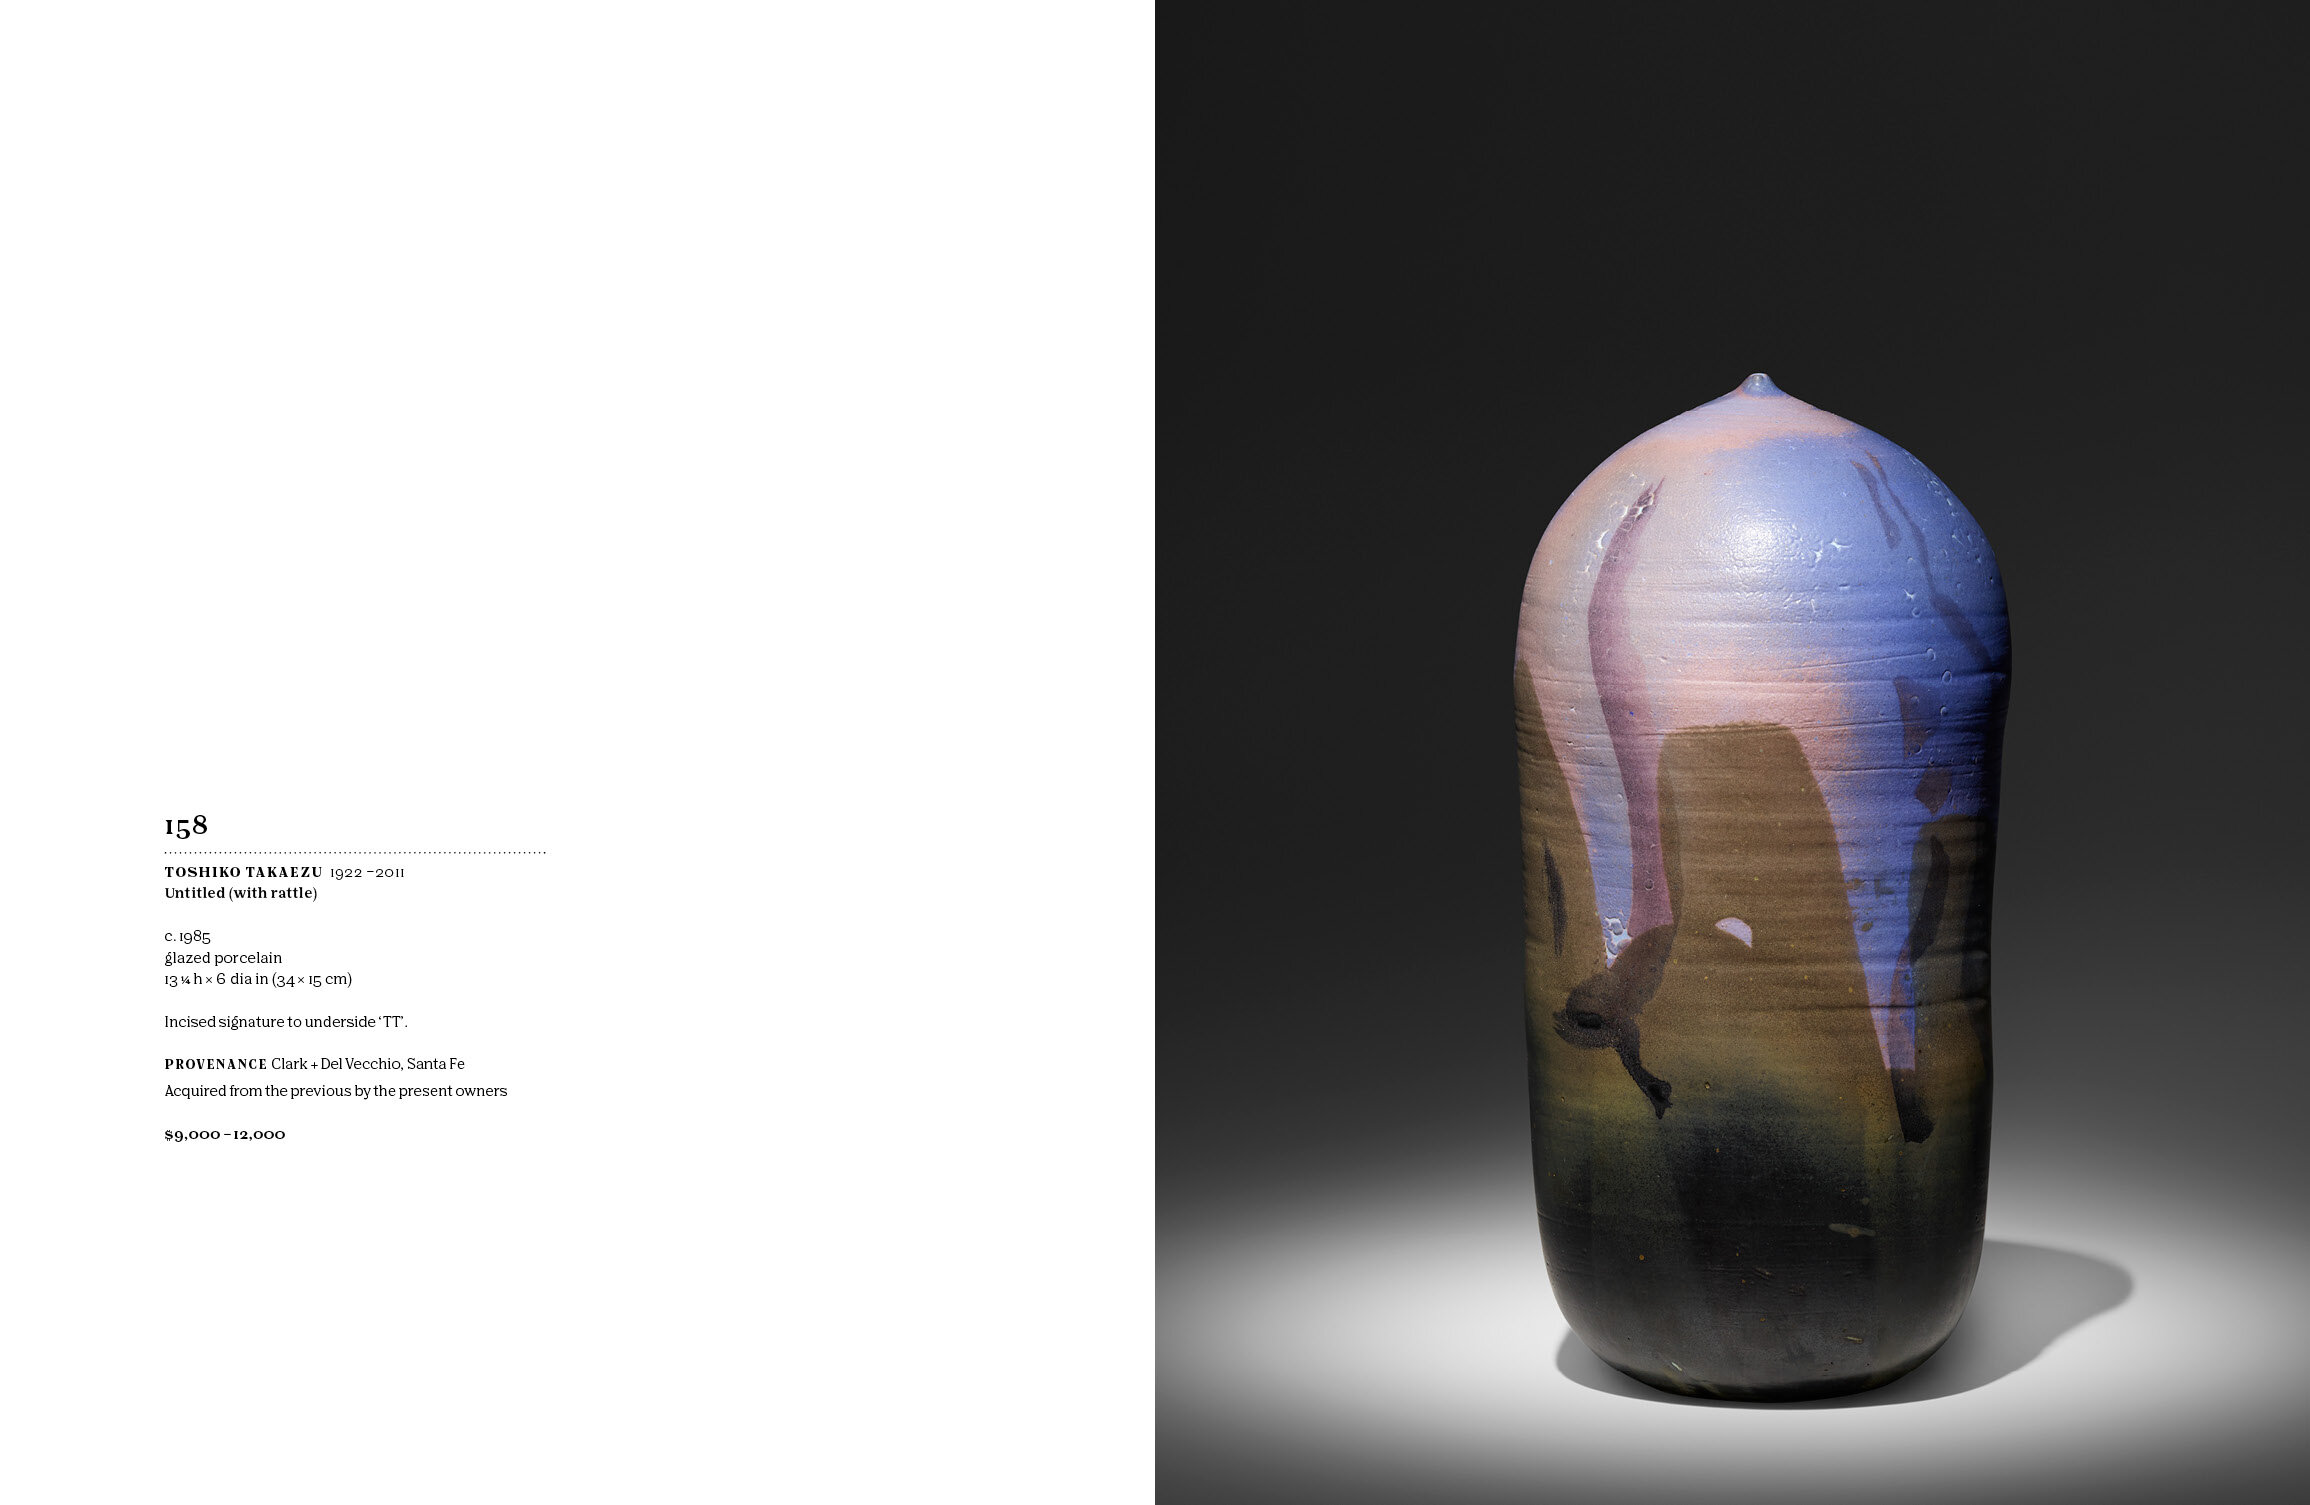 View or download the A Quiet Revolution: The Ceramics of Toshiko 